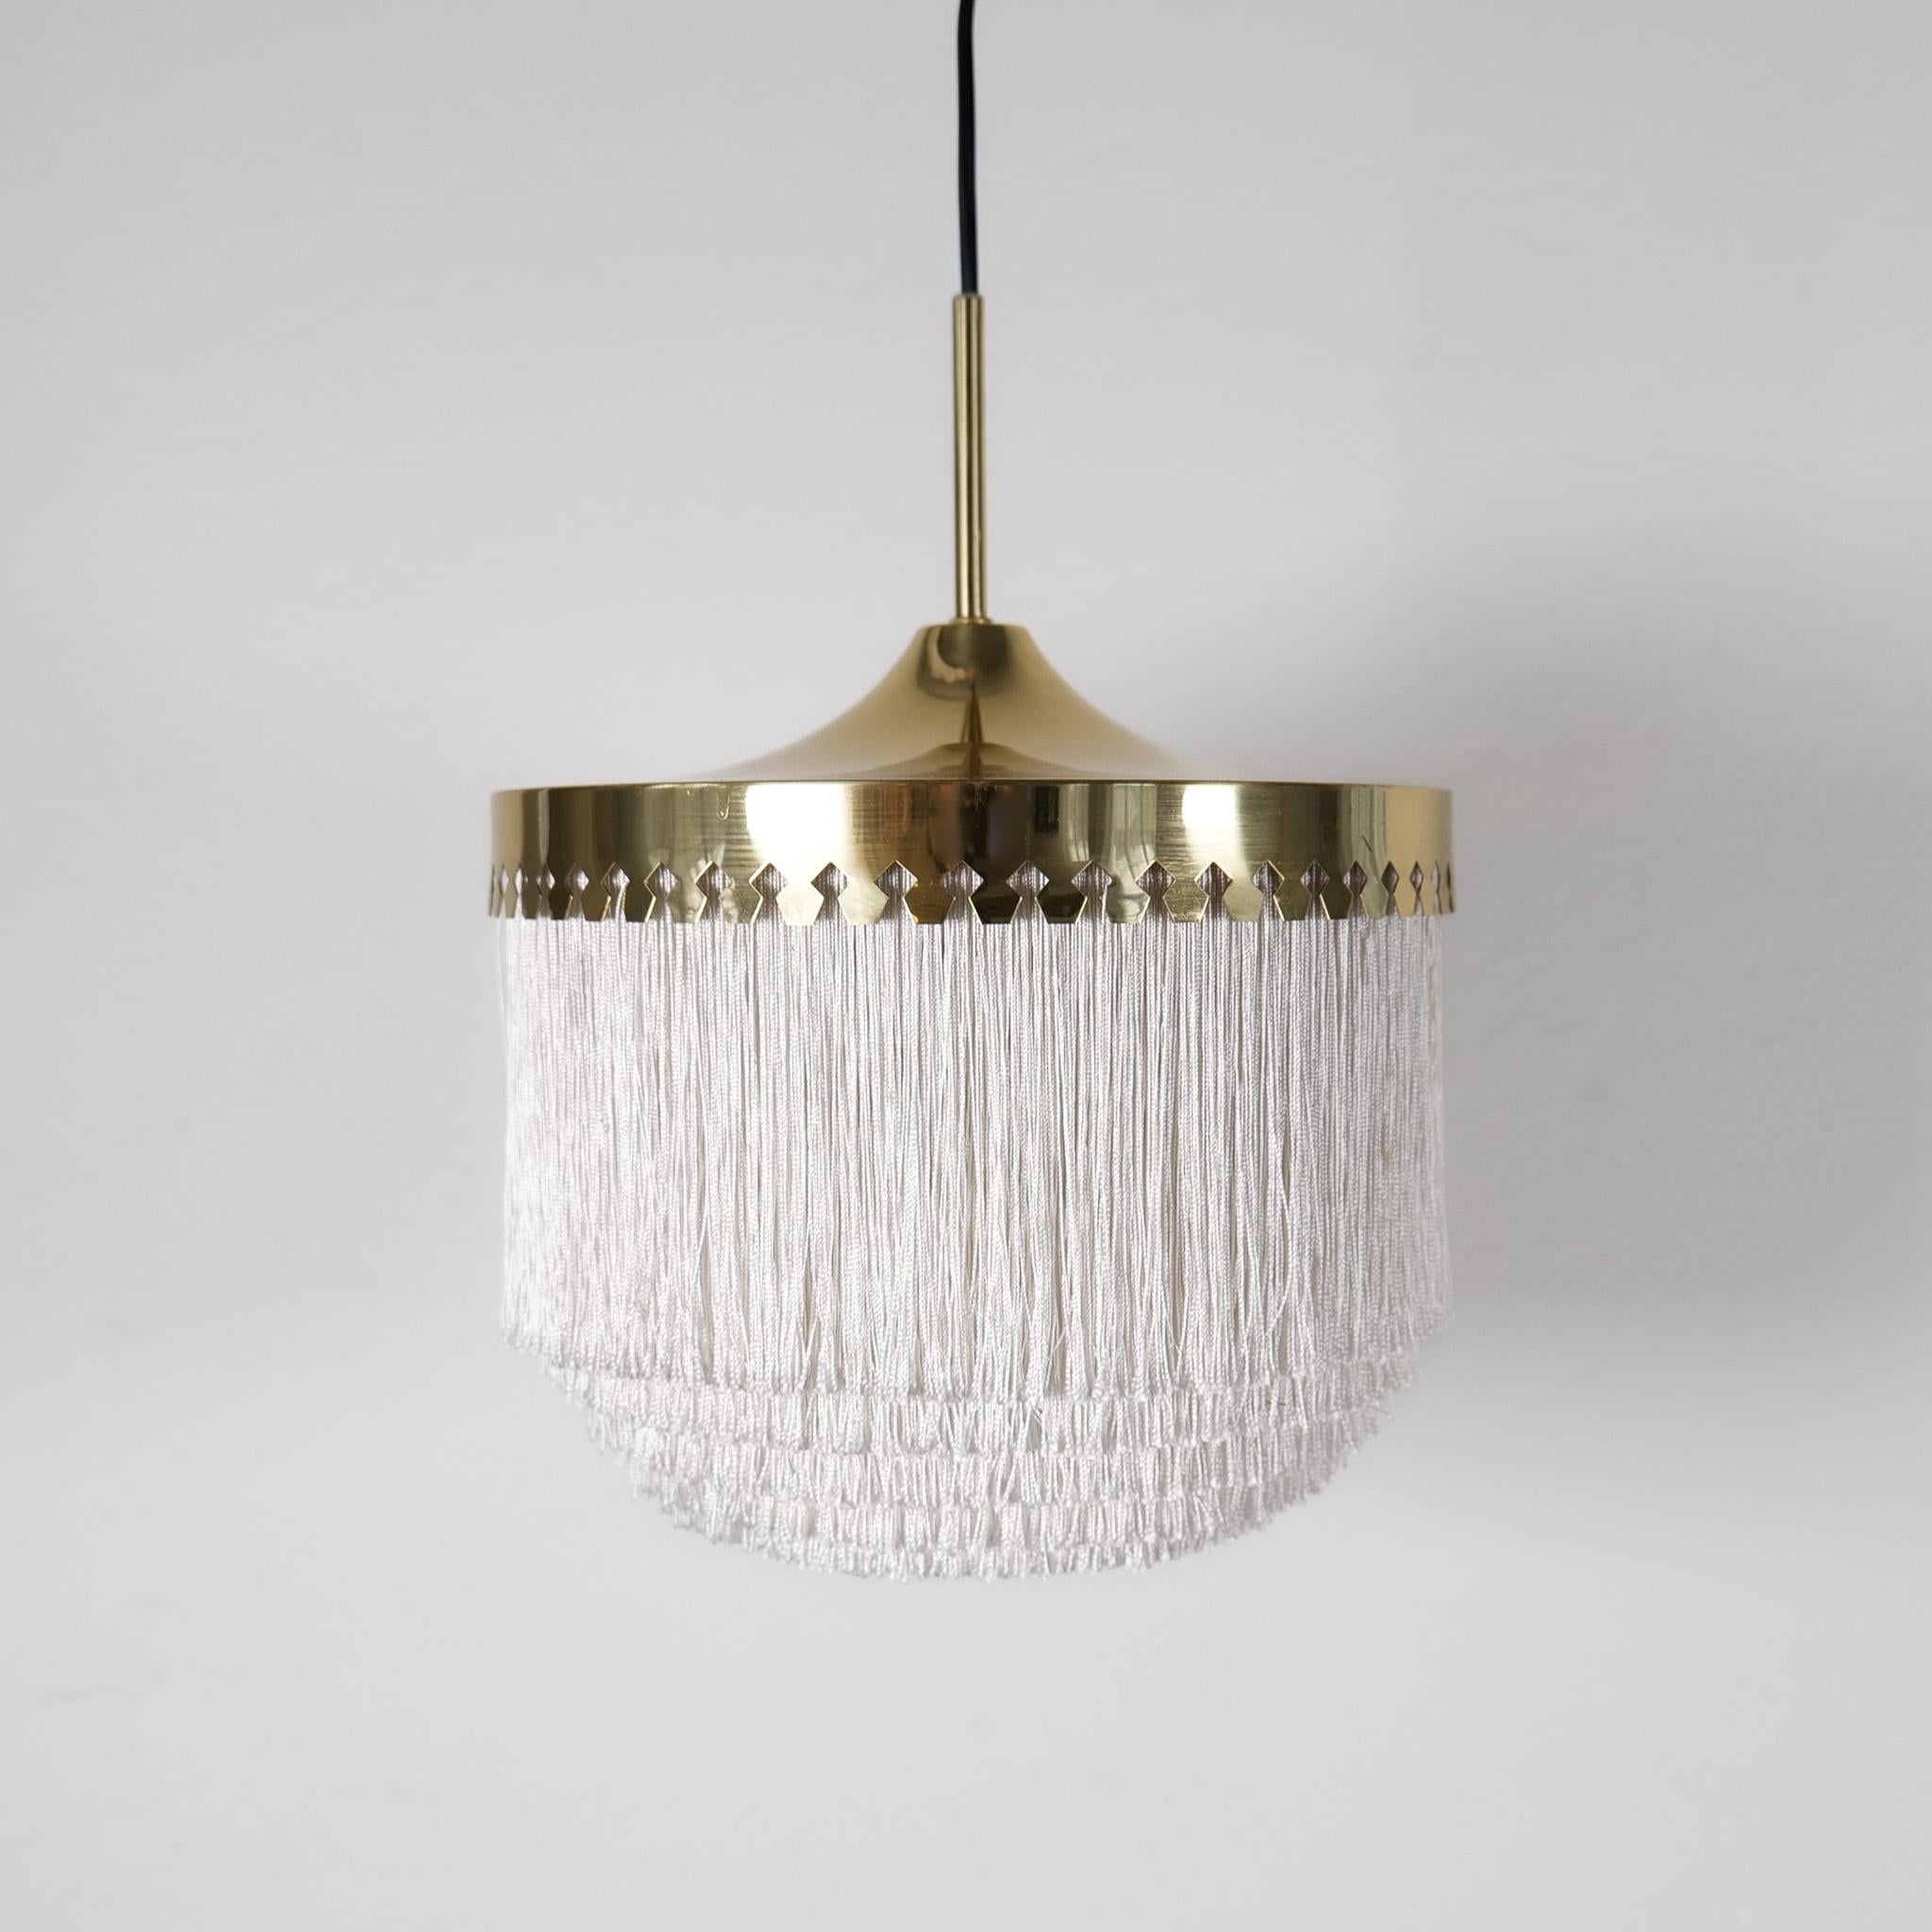 Wonderful ceiling lamp produced in Sweden for Hans-Agne Jakobsson, Markaryd, Sweden, 1960, design by Hans-Agne Jakobsson. This lamp has become and icon from the designer Hans Agne and is a great exampel of the Swedish desig of the time.   The lamps